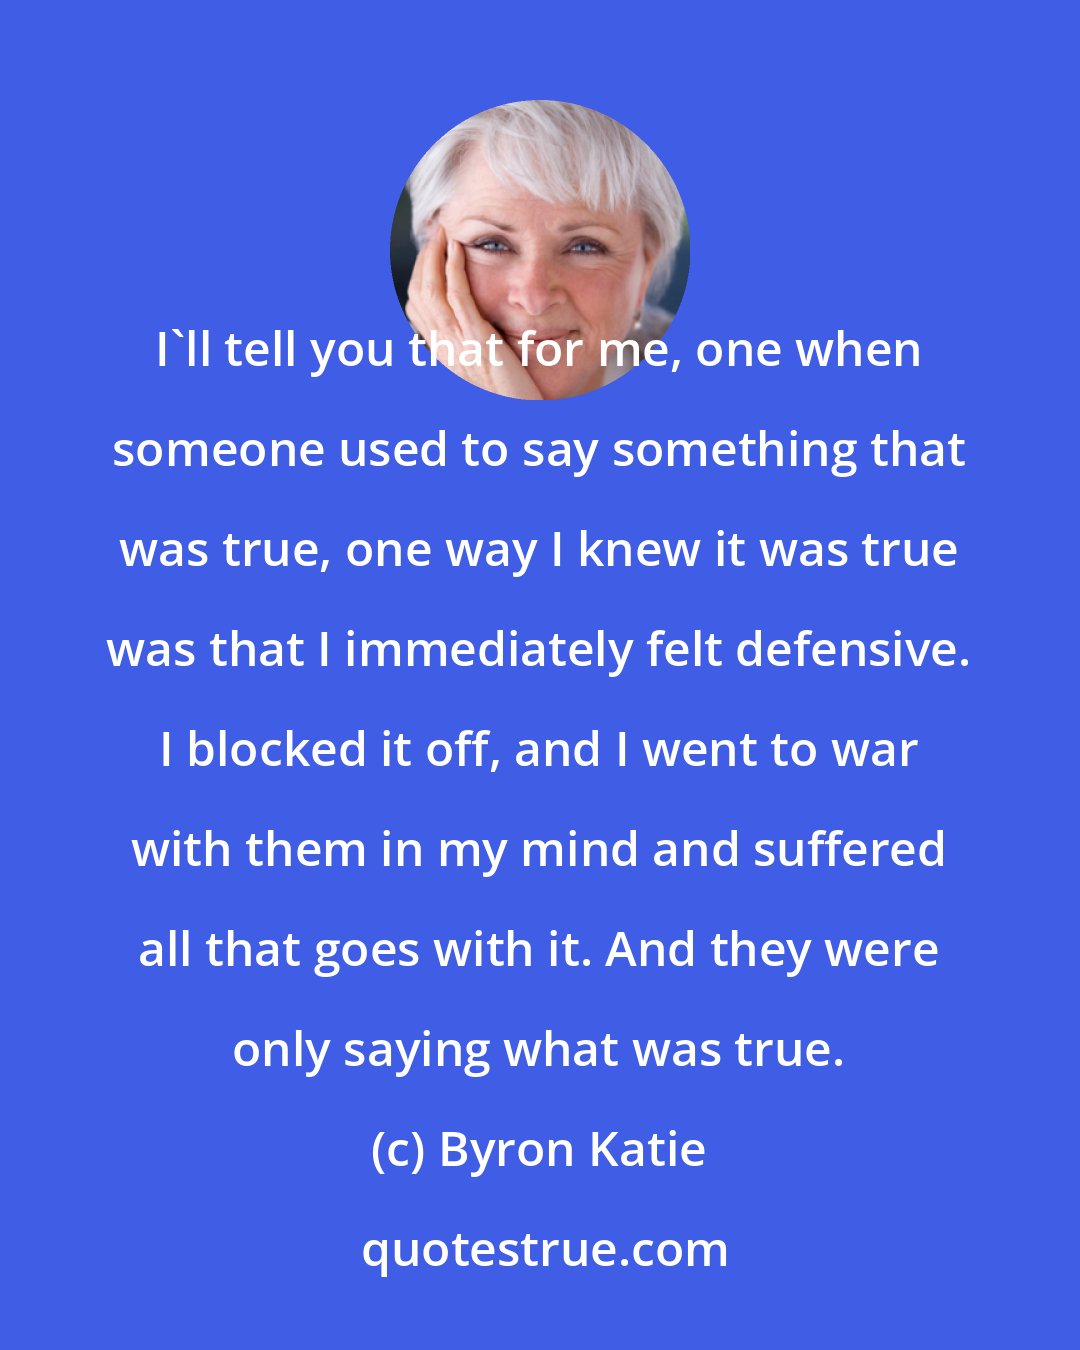 Byron Katie: I'll tell you that for me, one when someone used to say something that was true, one way I knew it was true was that I immediately felt defensive. I blocked it off, and I went to war with them in my mind and suffered all that goes with it. And they were only saying what was true.